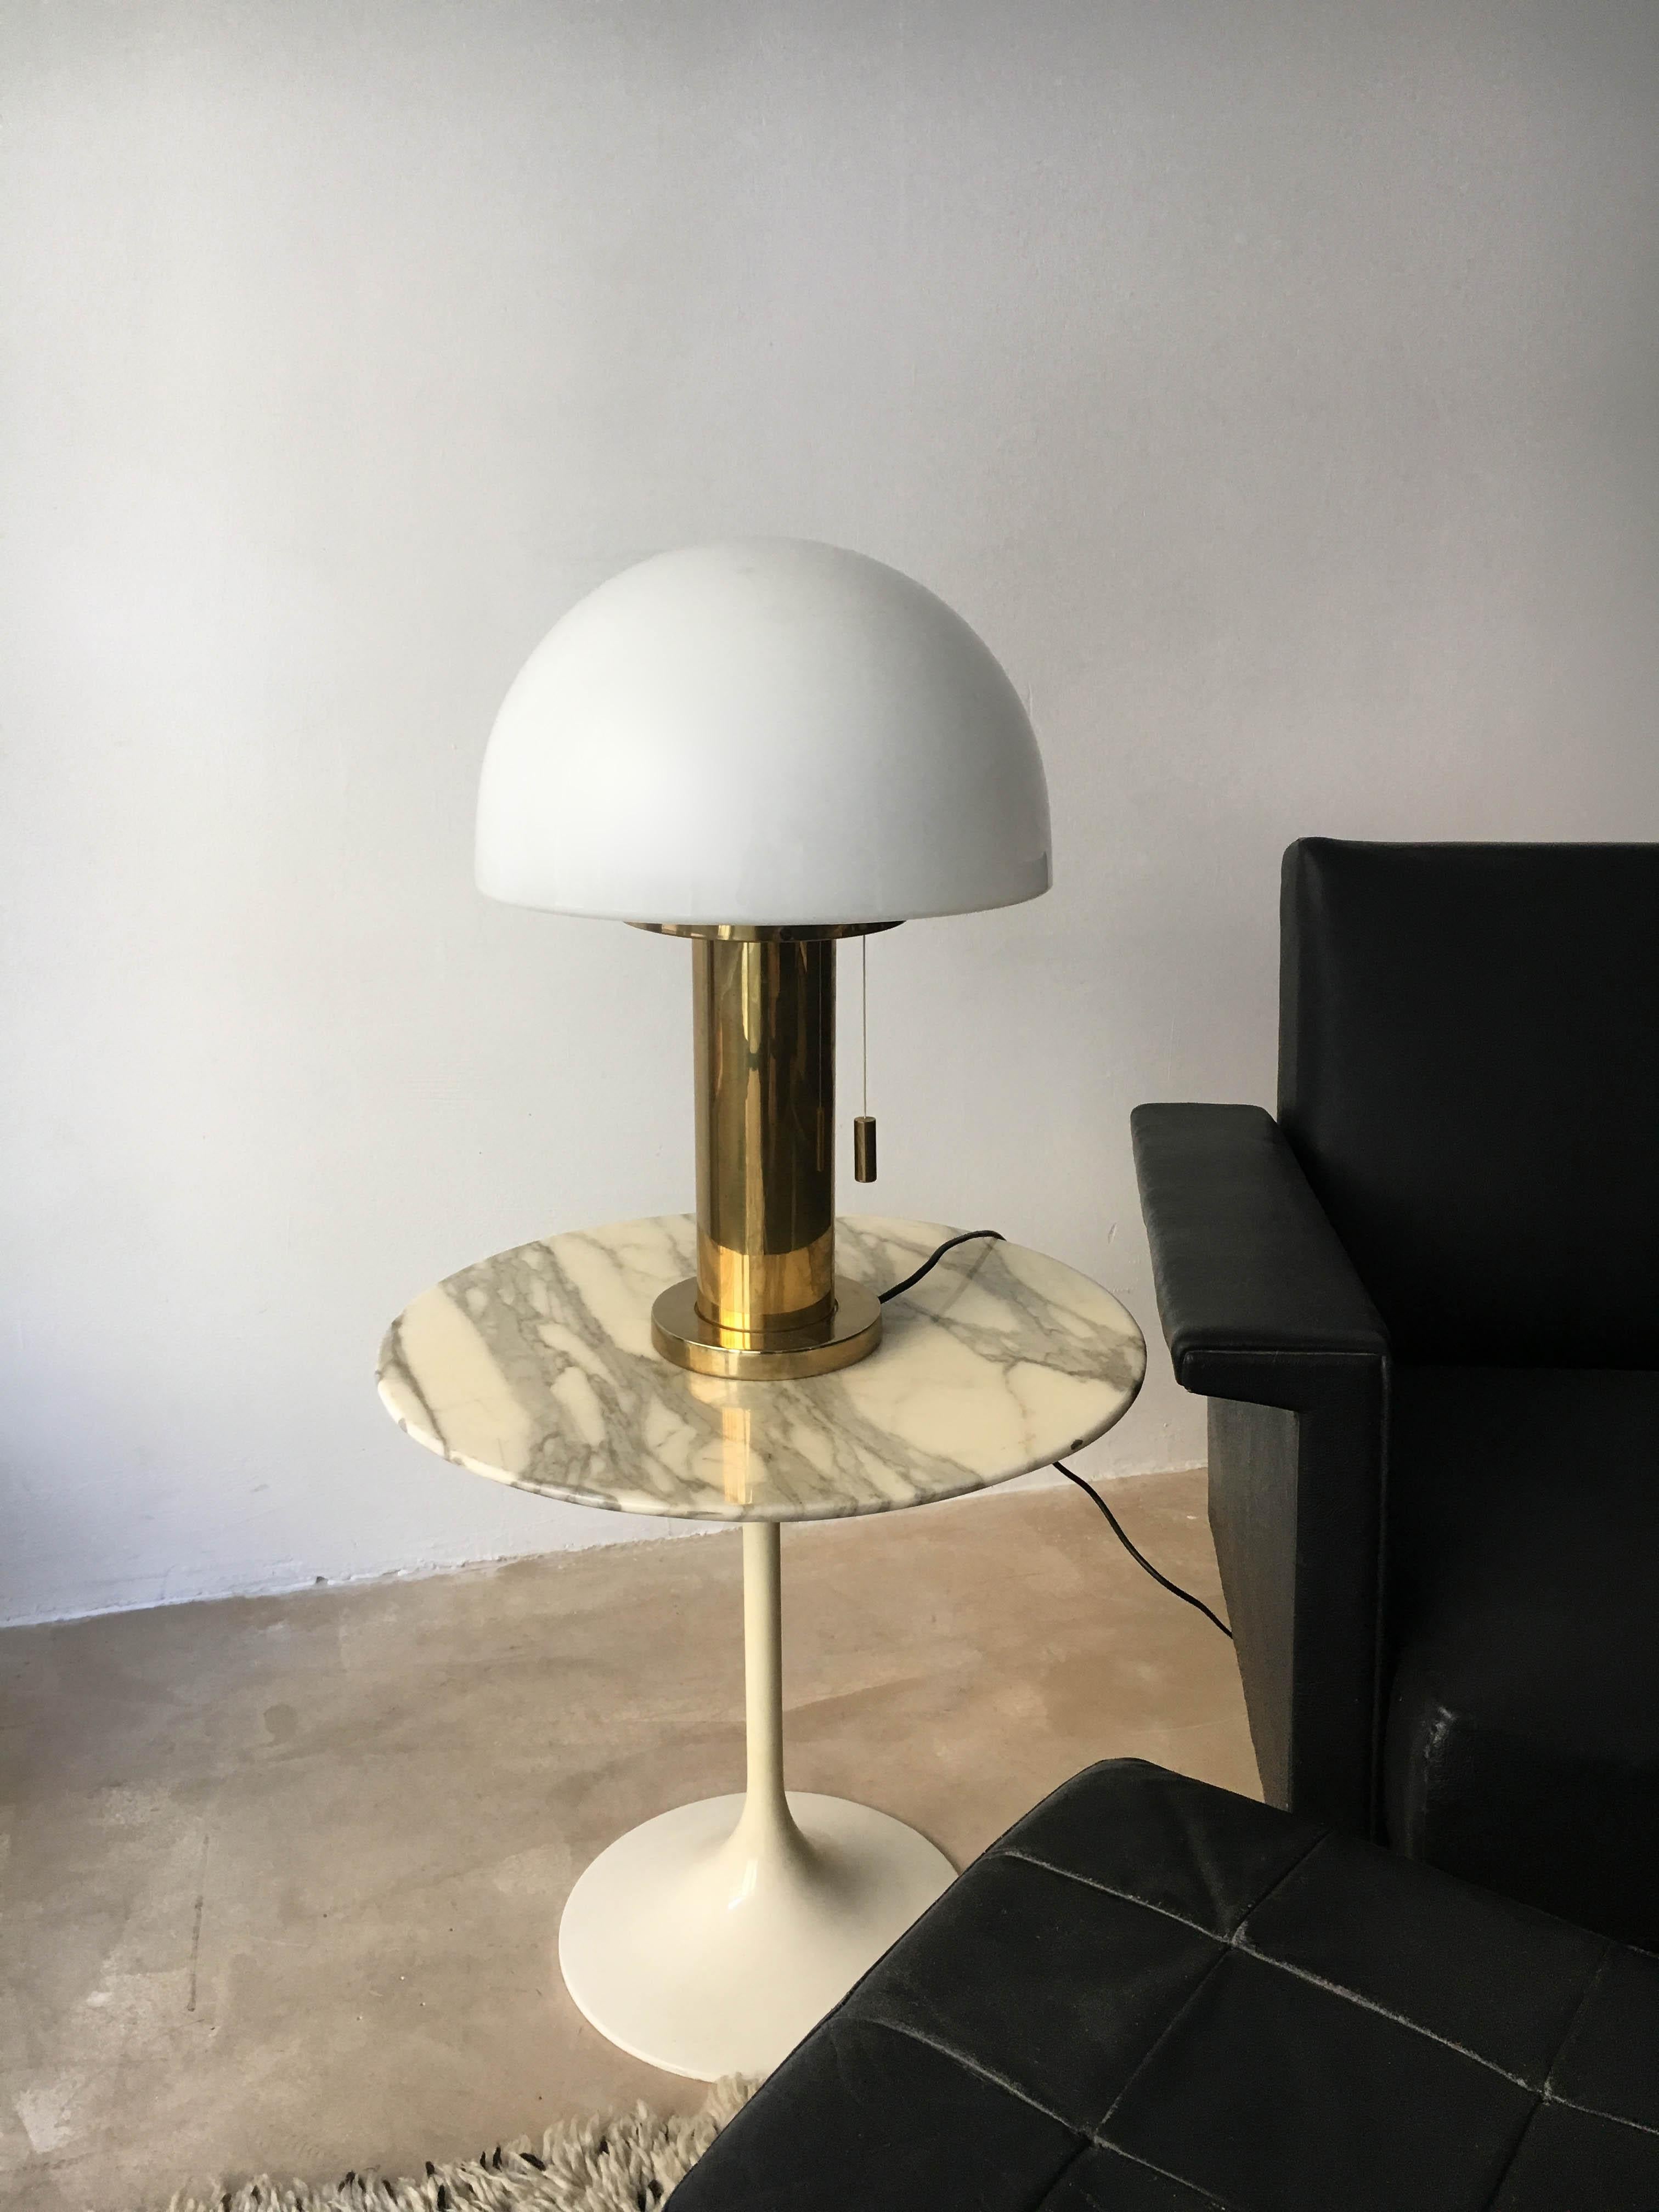 Glashütte Limburg mushroom table lamp satin glass, Germany, 1970s. Table lamp in the design of Karl Springer. Creates a beautiful even and lovely soft light. One regular E27 light bulb or LED, according to your preference. Overall in very good